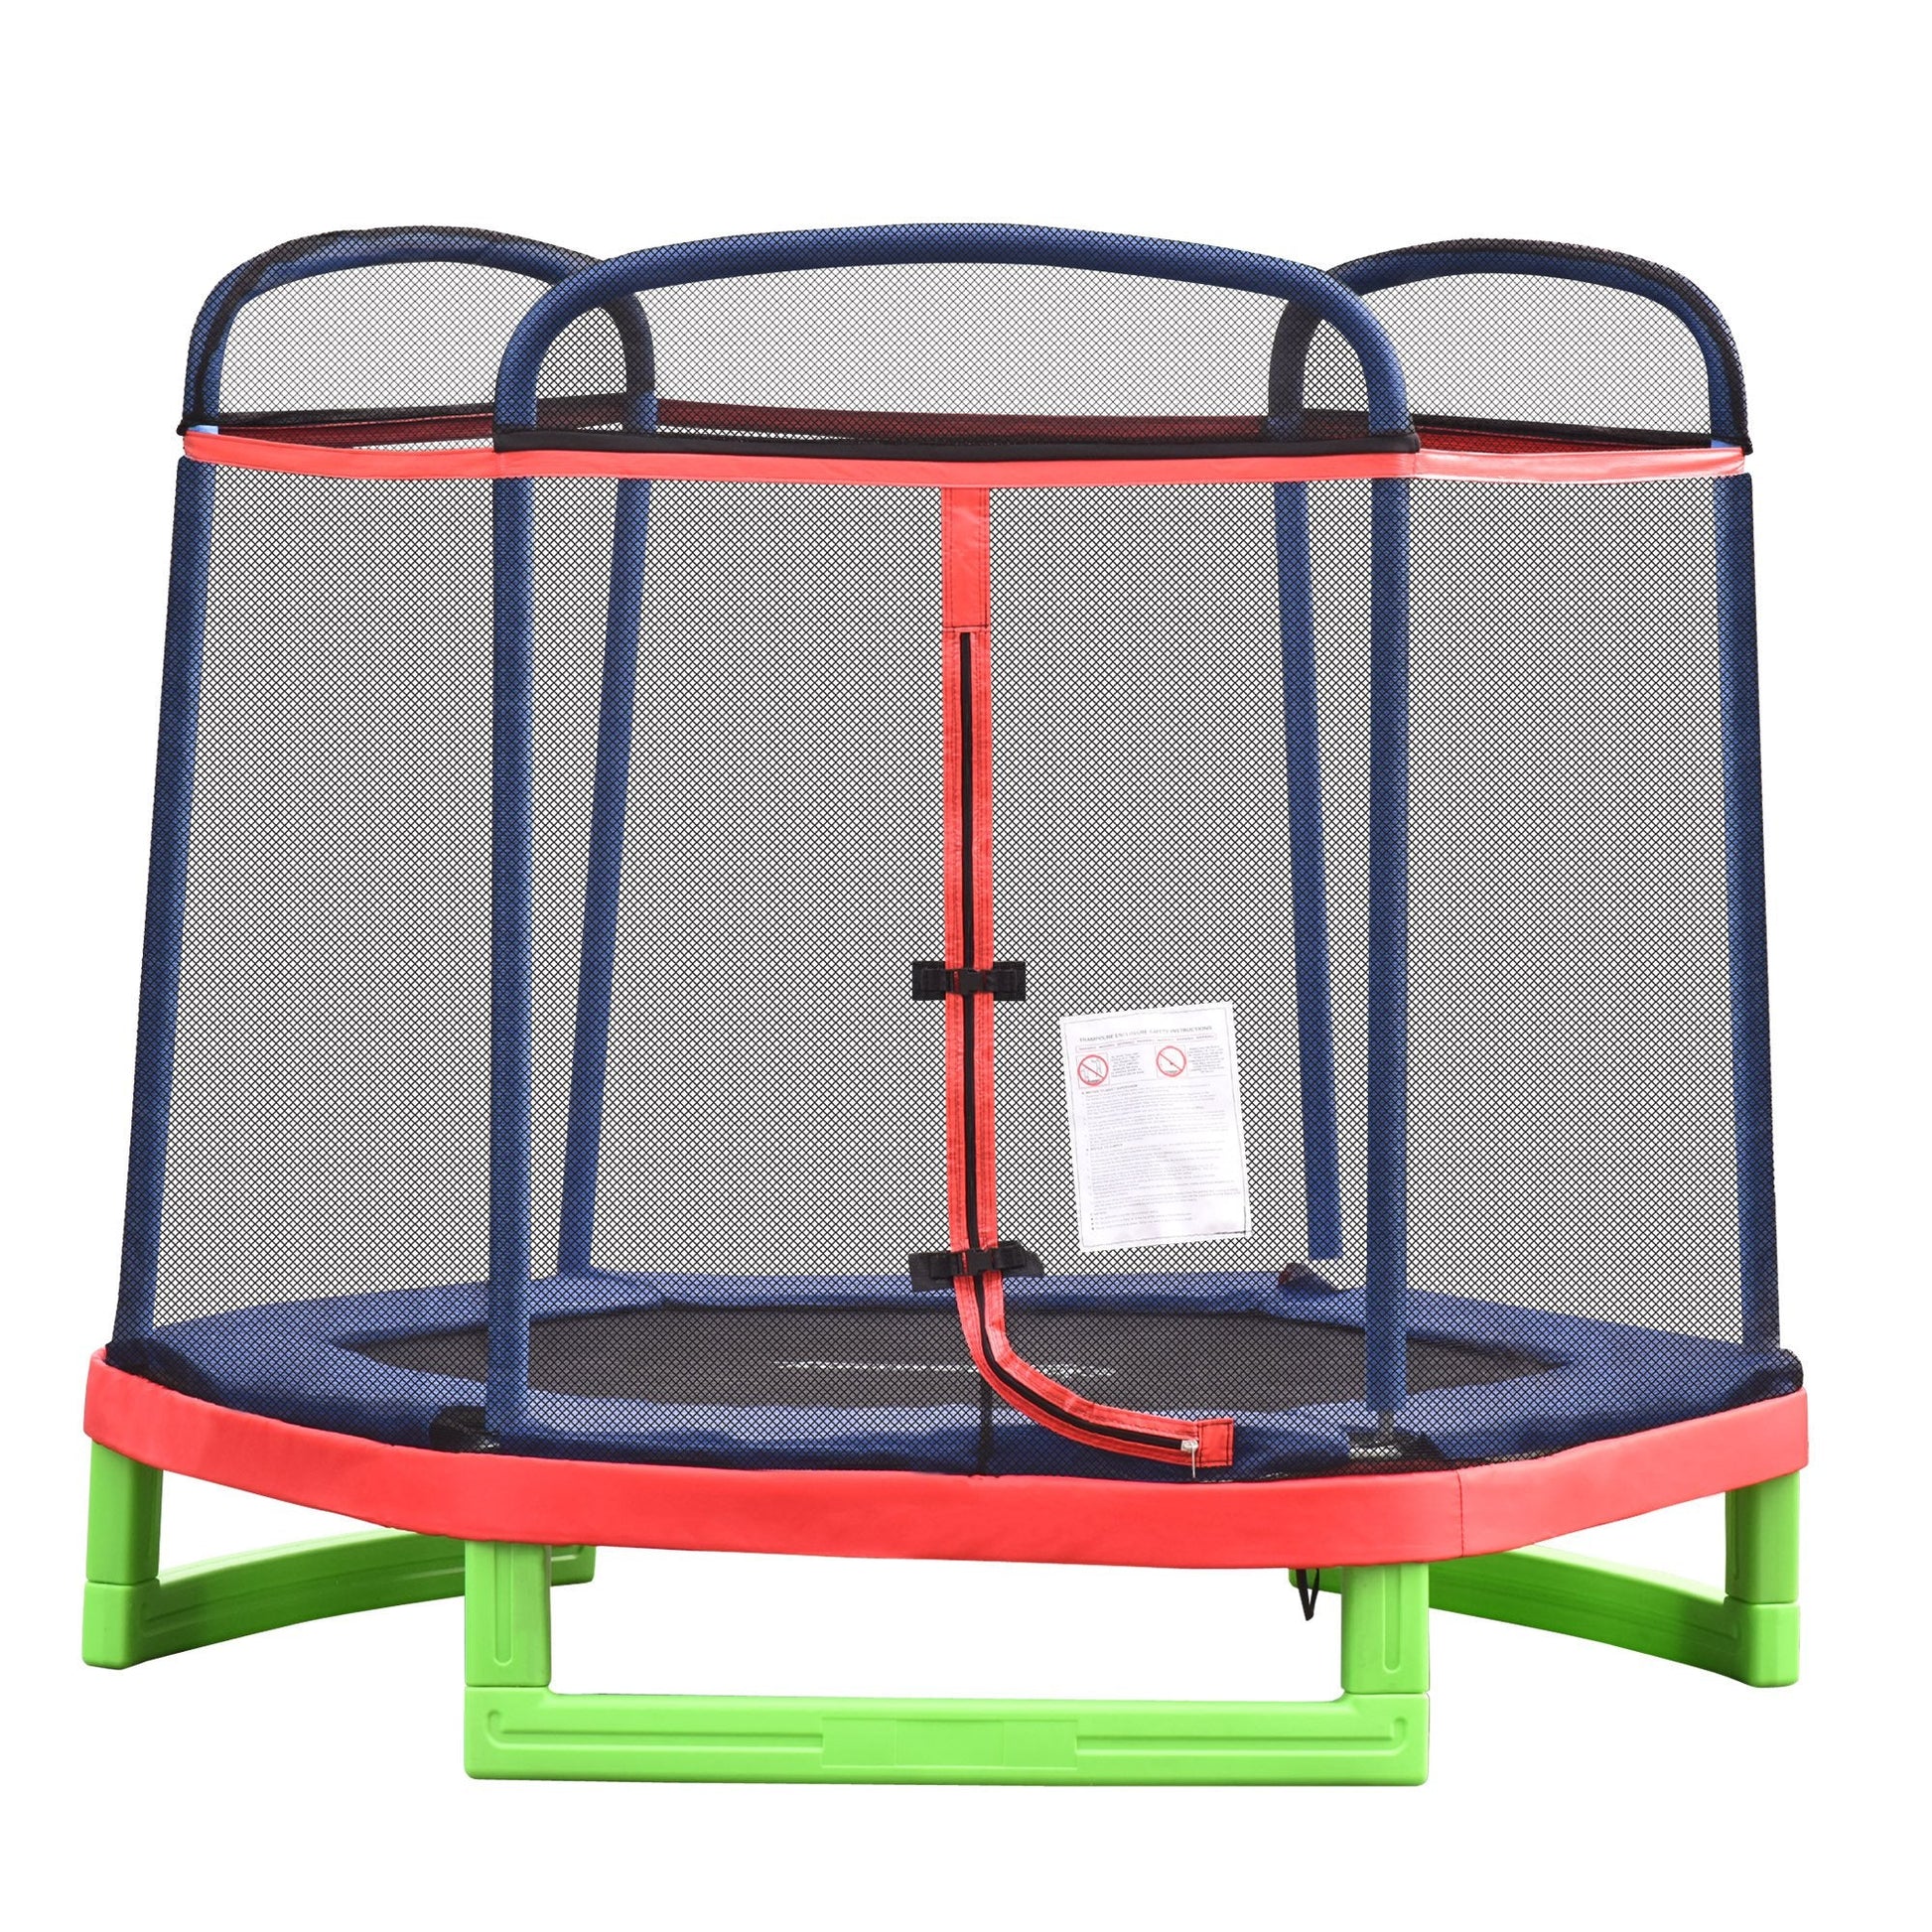 84.75" Kids Trampoline 7 FT Indoor Outdoor Trampolines with Safety Net Enclosure Built-in Zipper Padded Covering, for Boys and Girls, Red at Gallery Canada